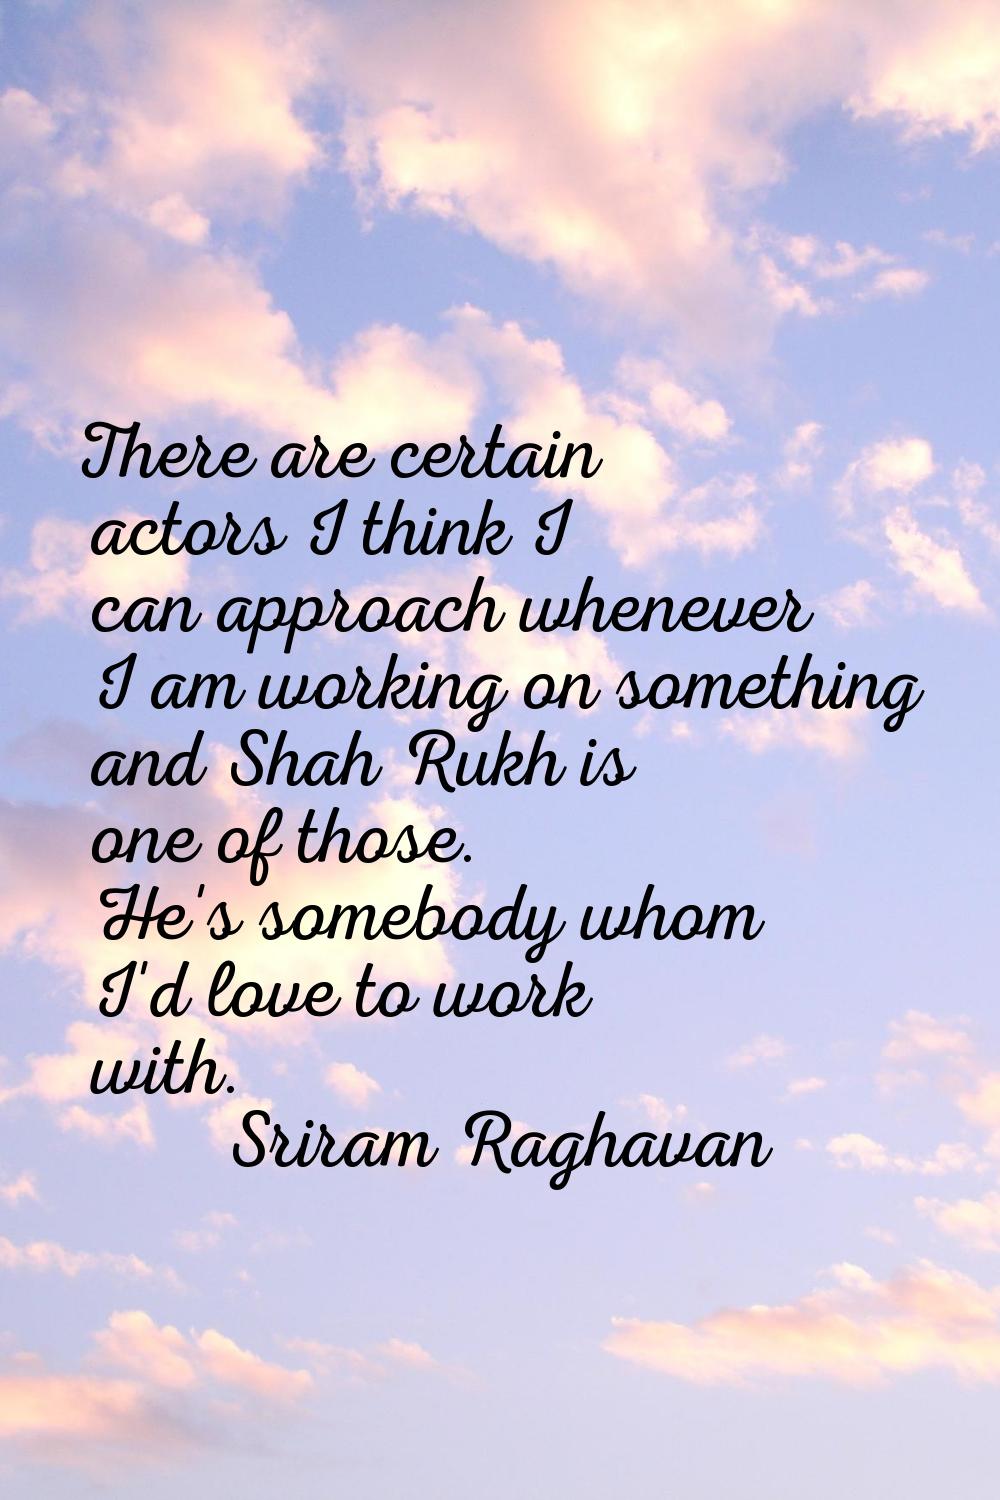 There are certain actors I think I can approach whenever I am working on something and Shah Rukh is